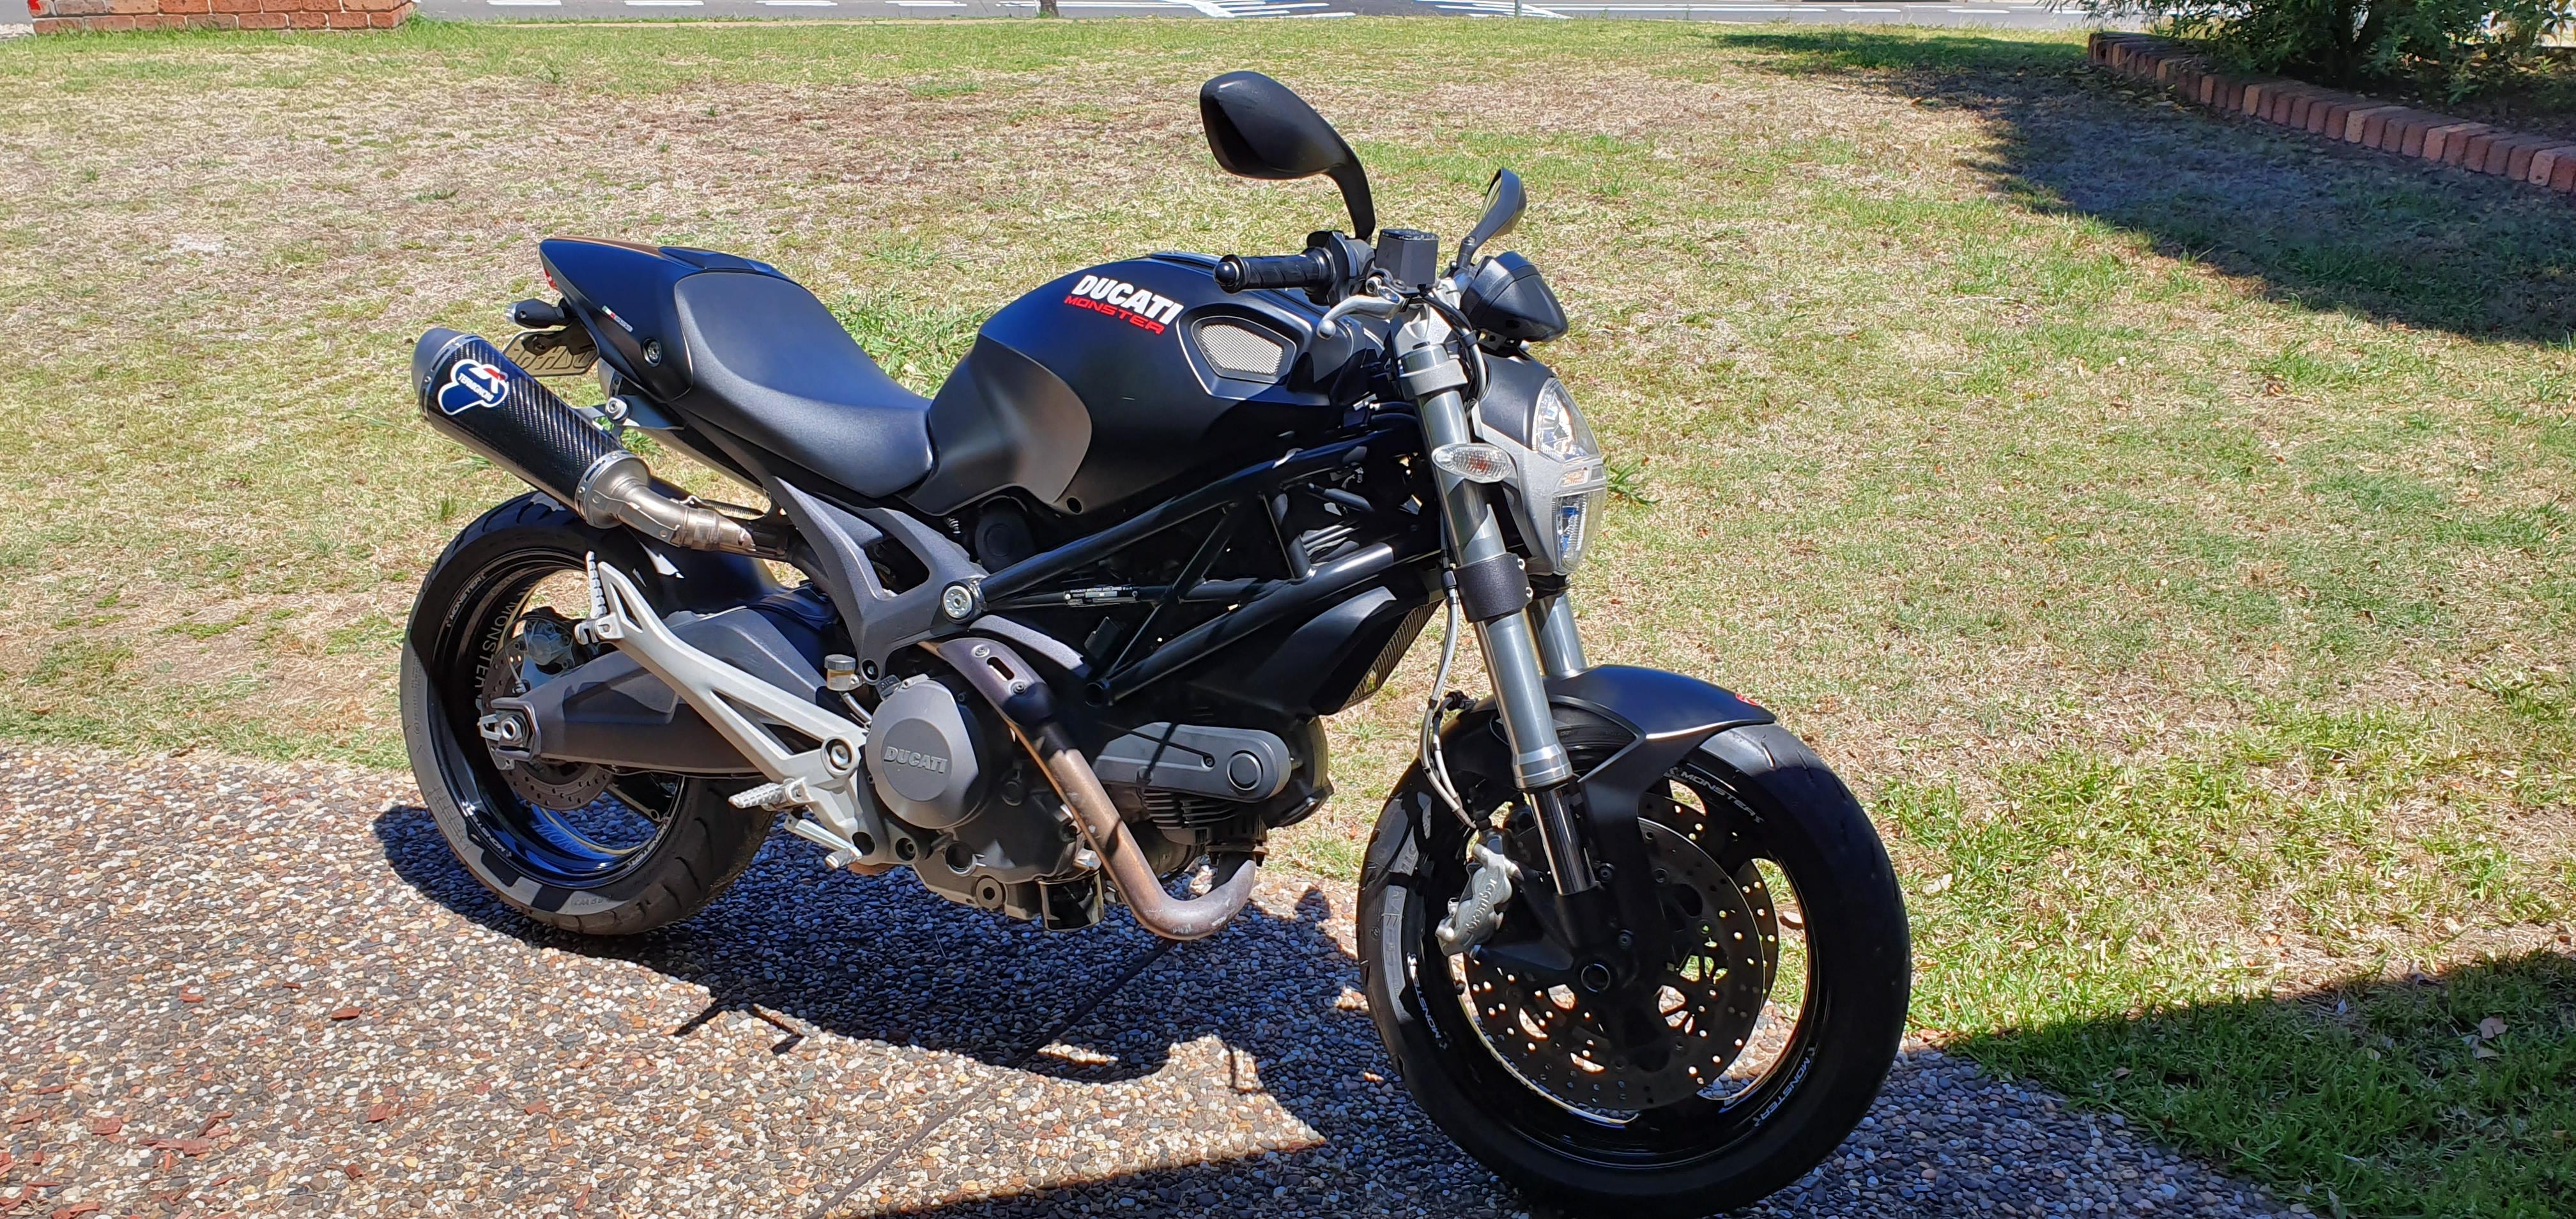 2012 Ducati Monster 796 ABS for Sale | ClassicCars.com 